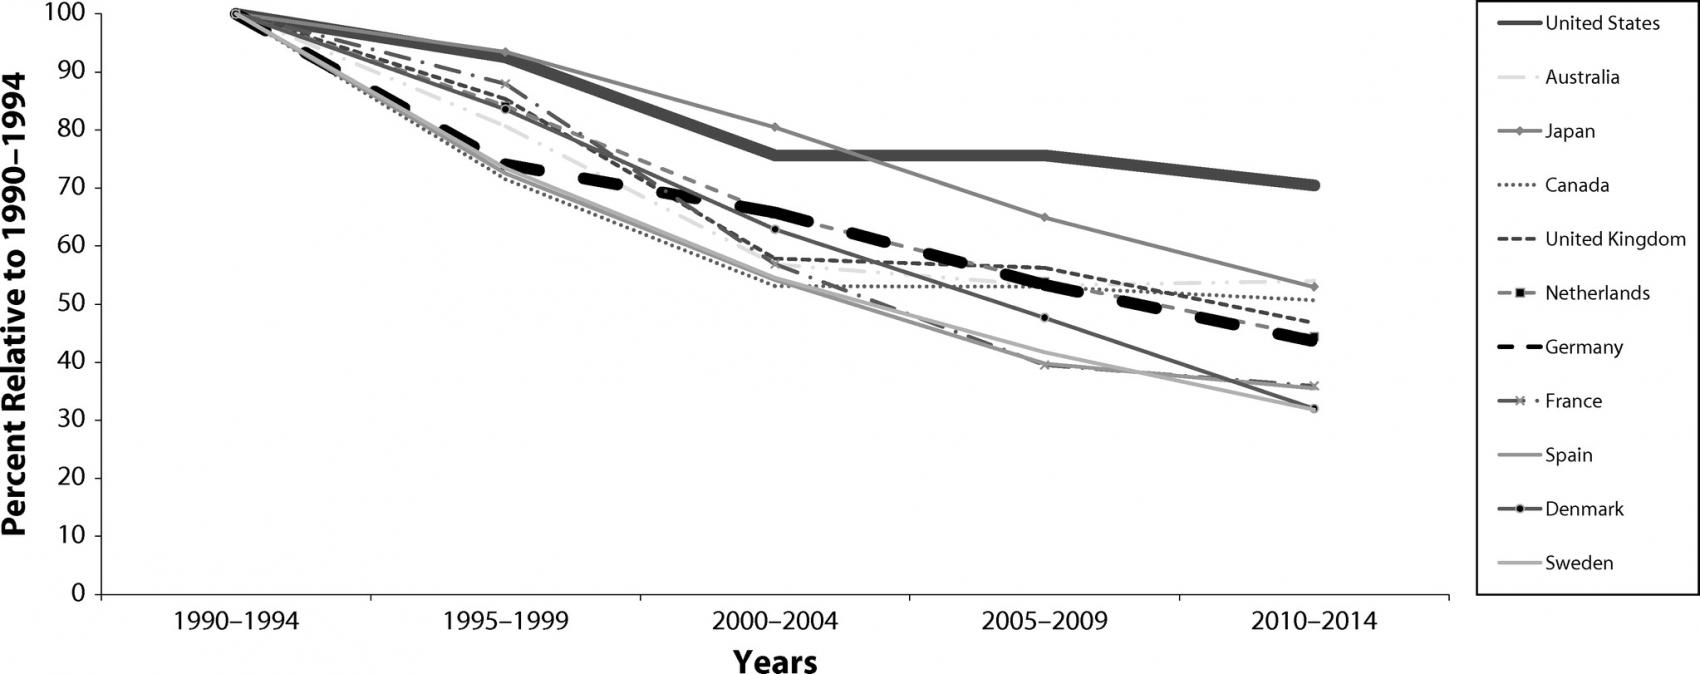 FIGURE 2— Trend in Cyclist Fatality Rate per 100 000 Population 1990–2014, 5-Year Annual Averages Relative to 1990–1994 Average.  Note. For comparison, the 1990–1994 average was set at 100%. Source. Calculated by the authors on the basis of data from the Organisation for Economic Cooperation and Development